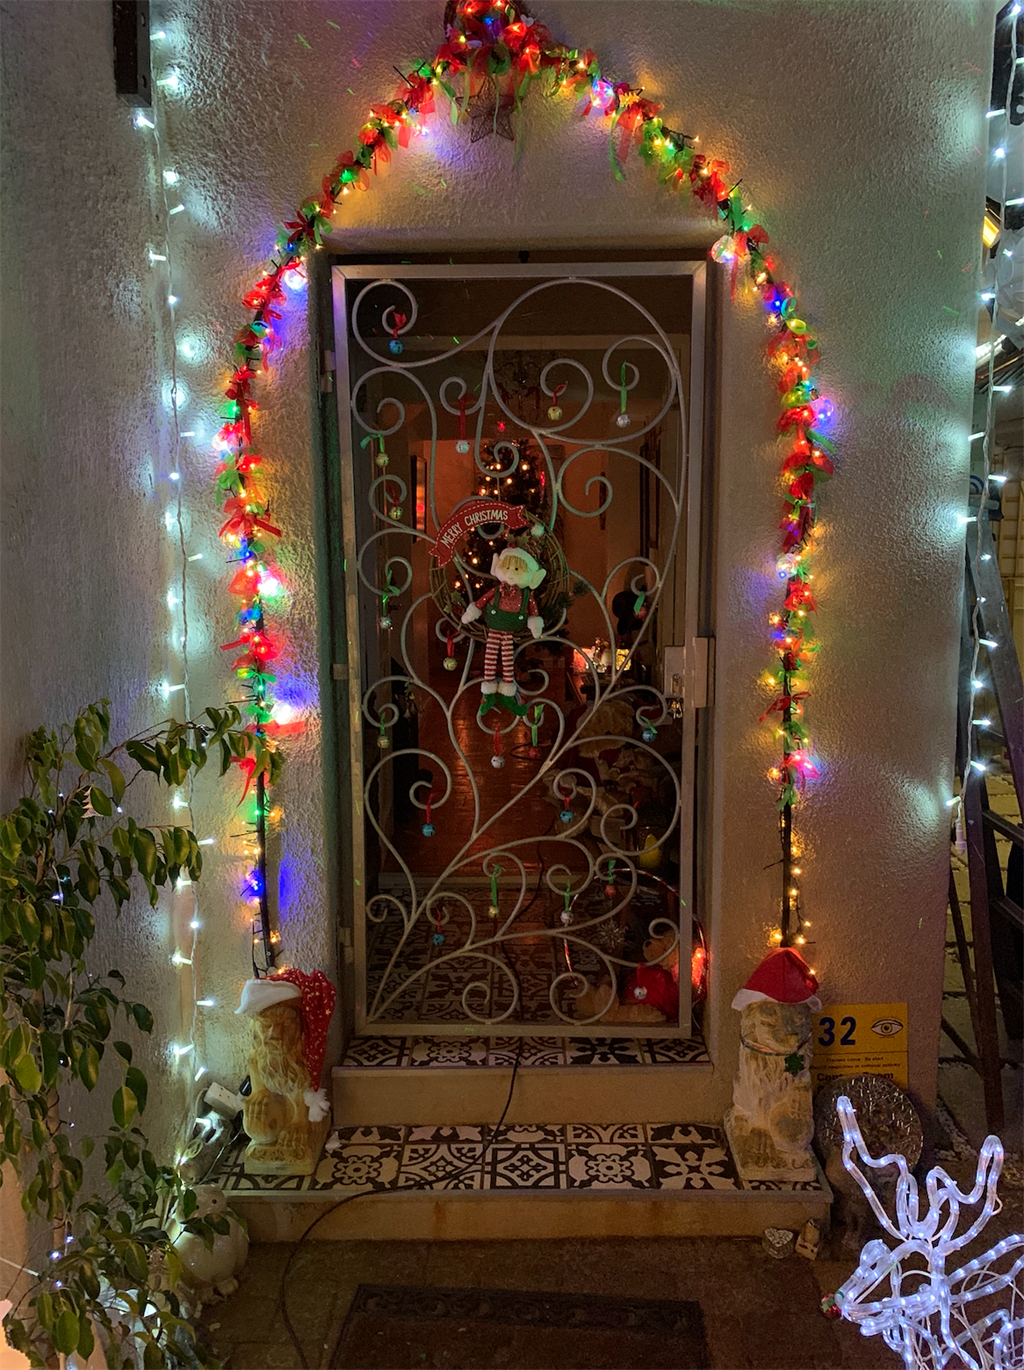 The gate of Bernhardi’s front door was decorated t